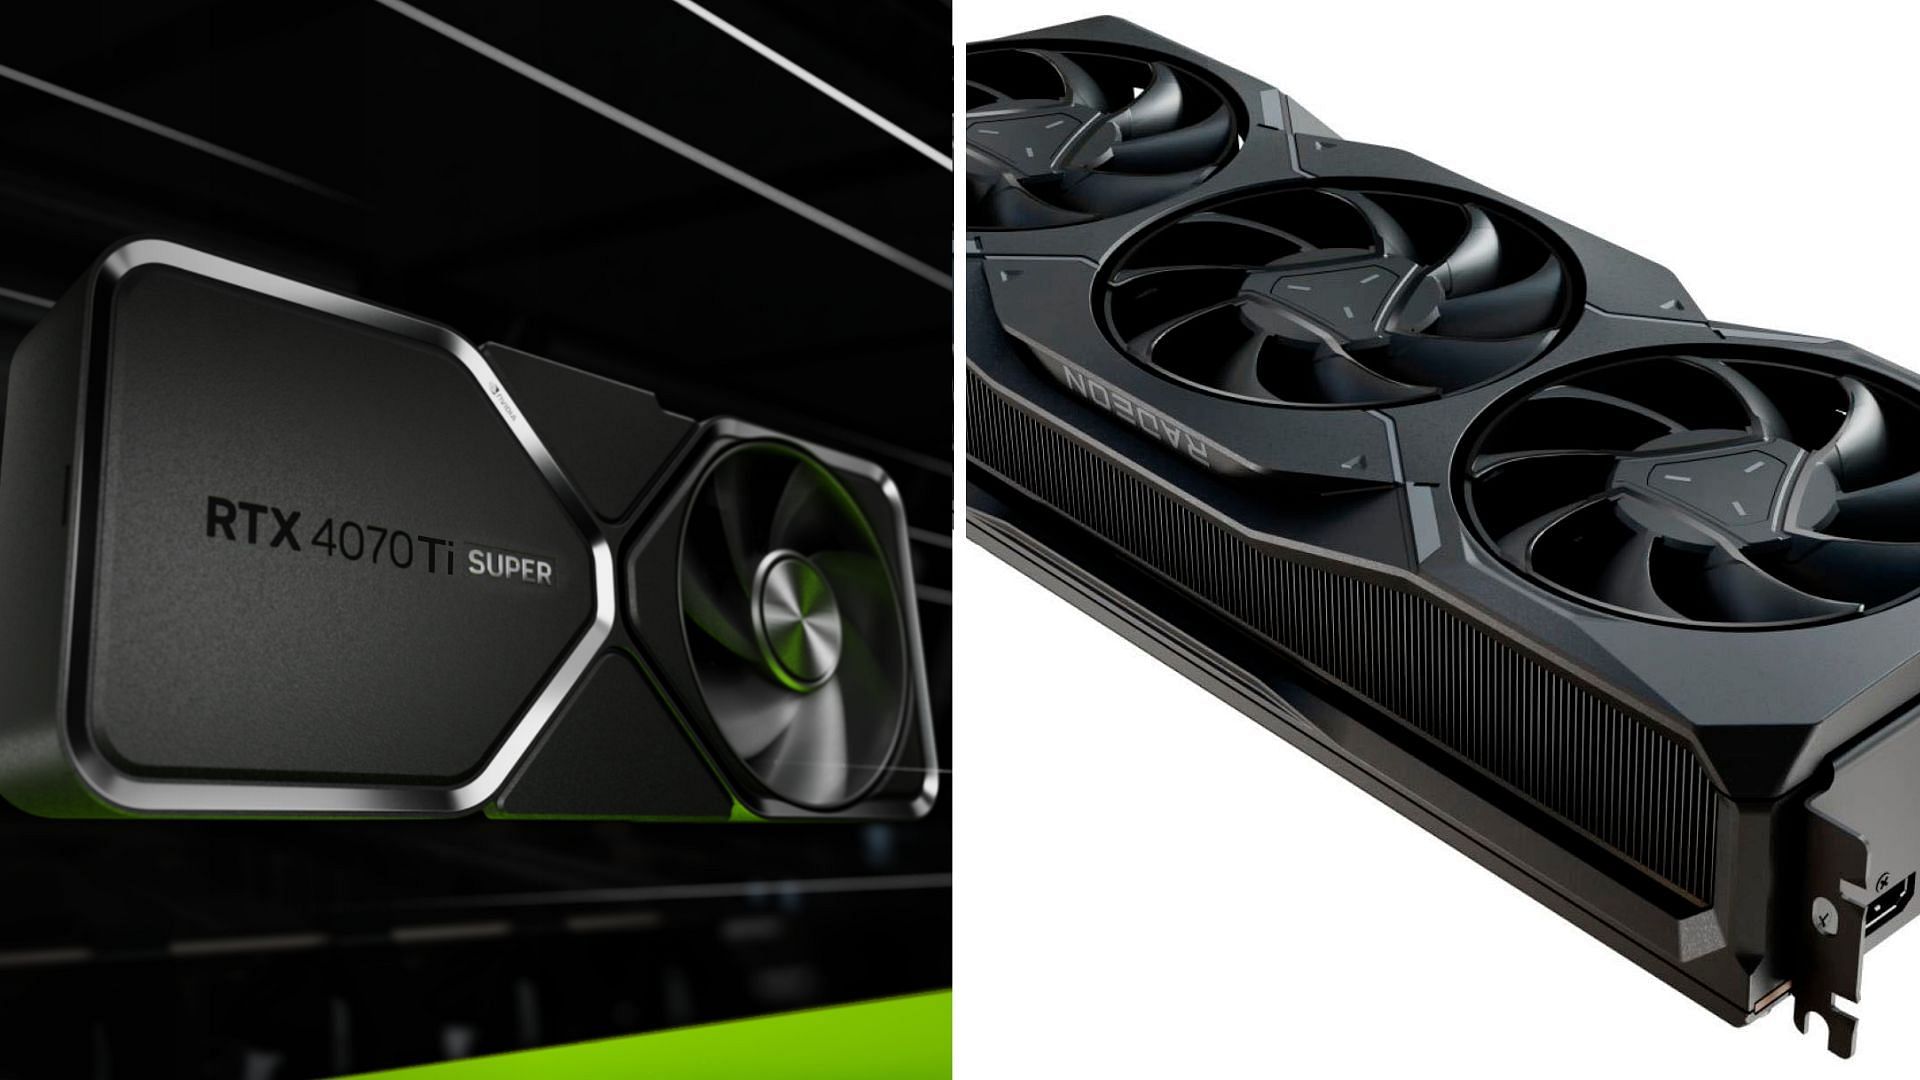 The Nvidia RTX 4070 Ti Super and AMD Radeon RX 7900 XT are powerful GPUs for 4K gaming (Image via Nvidia and AMD)